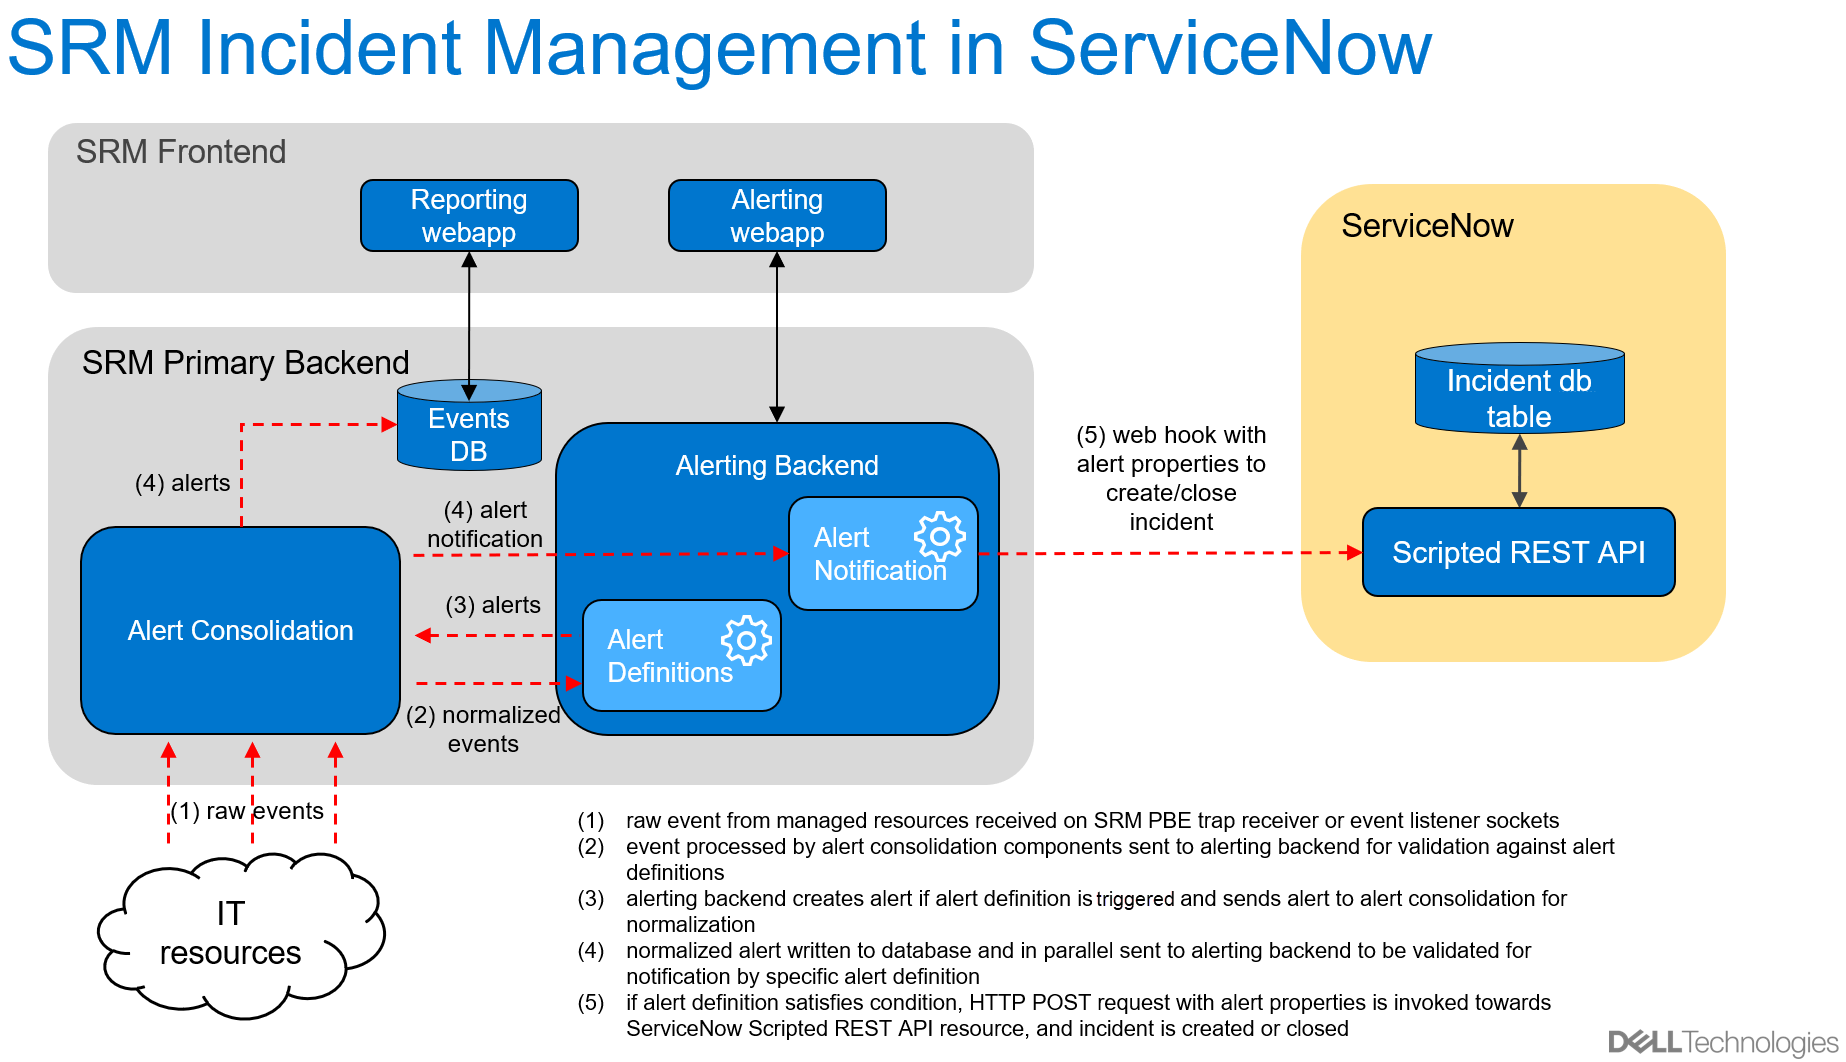 The diagram shows how the architecture of SRM incident management in ServiceNow works. The SRM front end communicates with the SRM Primary Backend, which connects with both IT resources and Service now. 